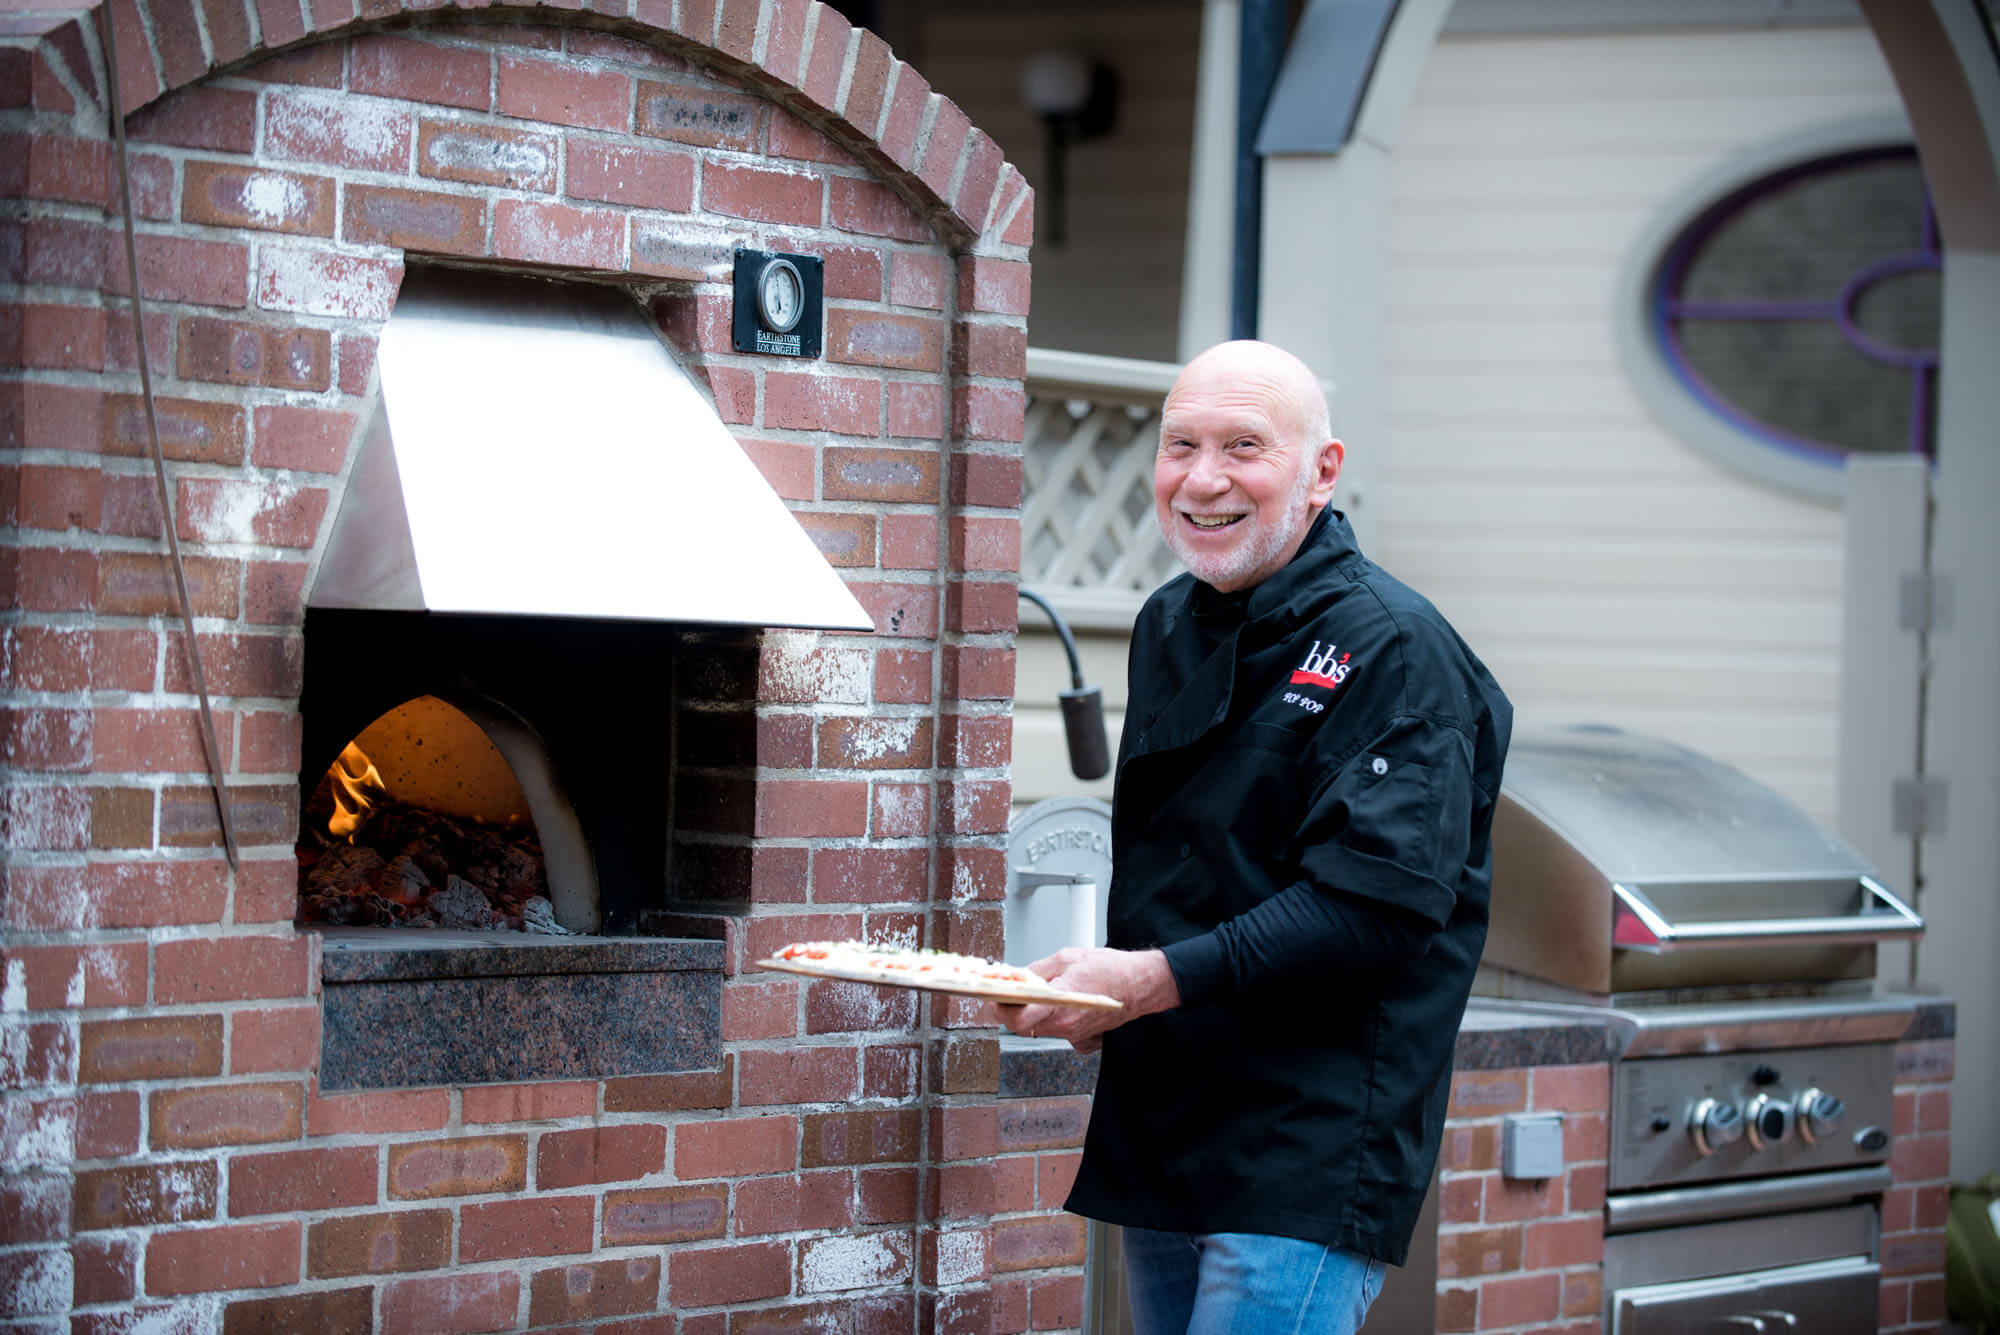 headshot of an older man cooking pizza in an outdoor oven